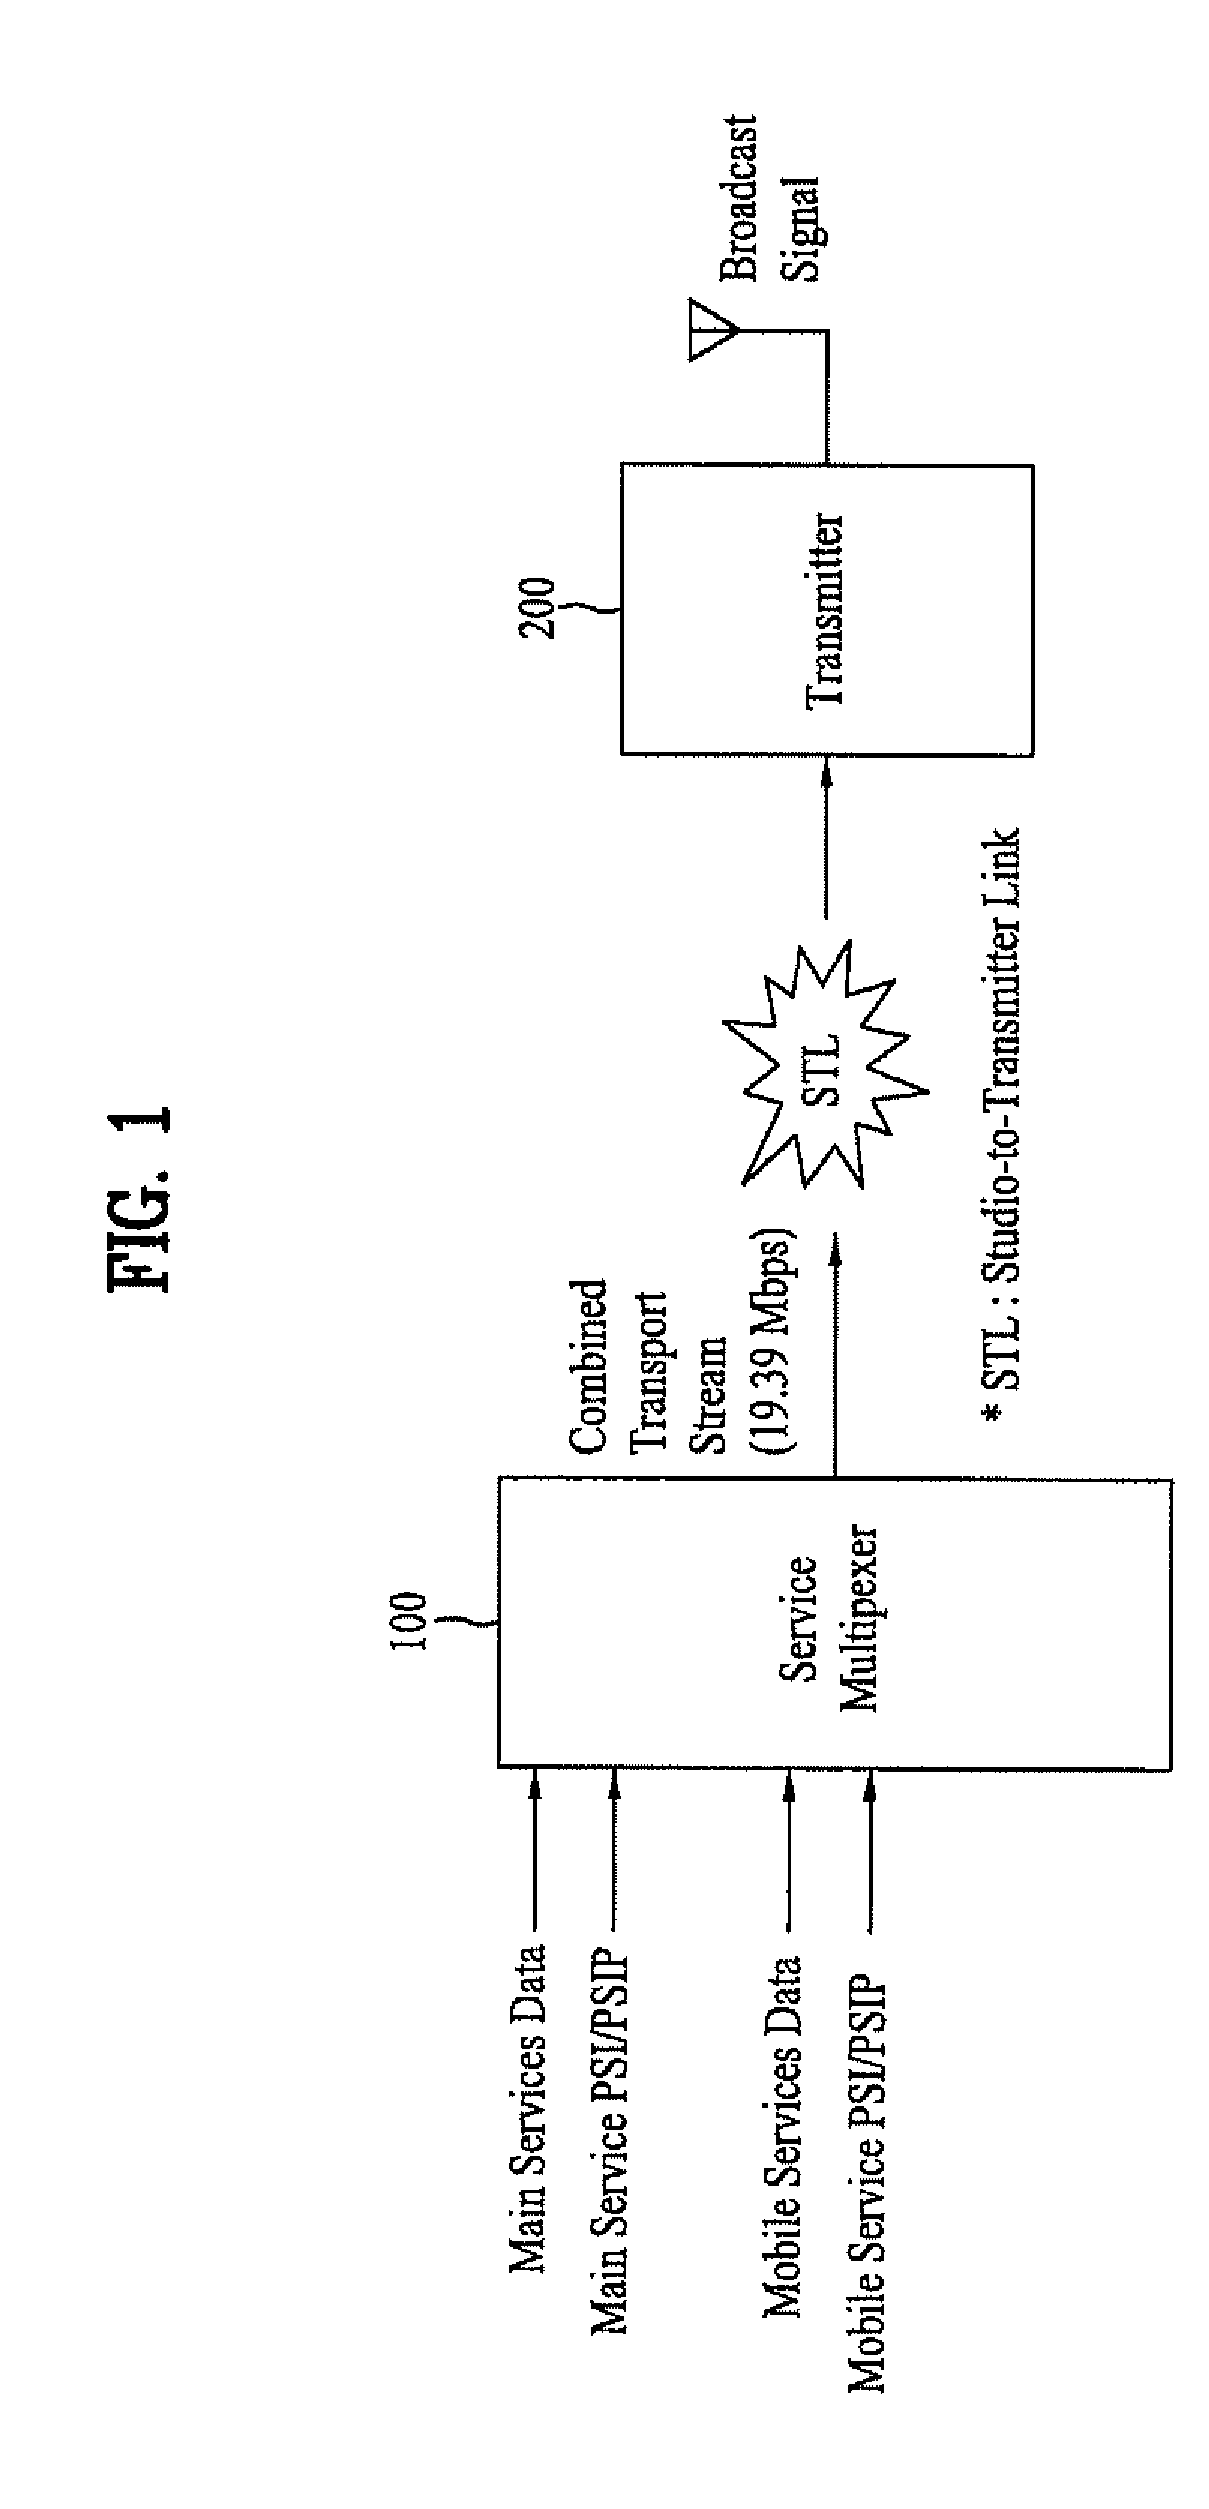 DTV receiving system and method of processing DTV signal